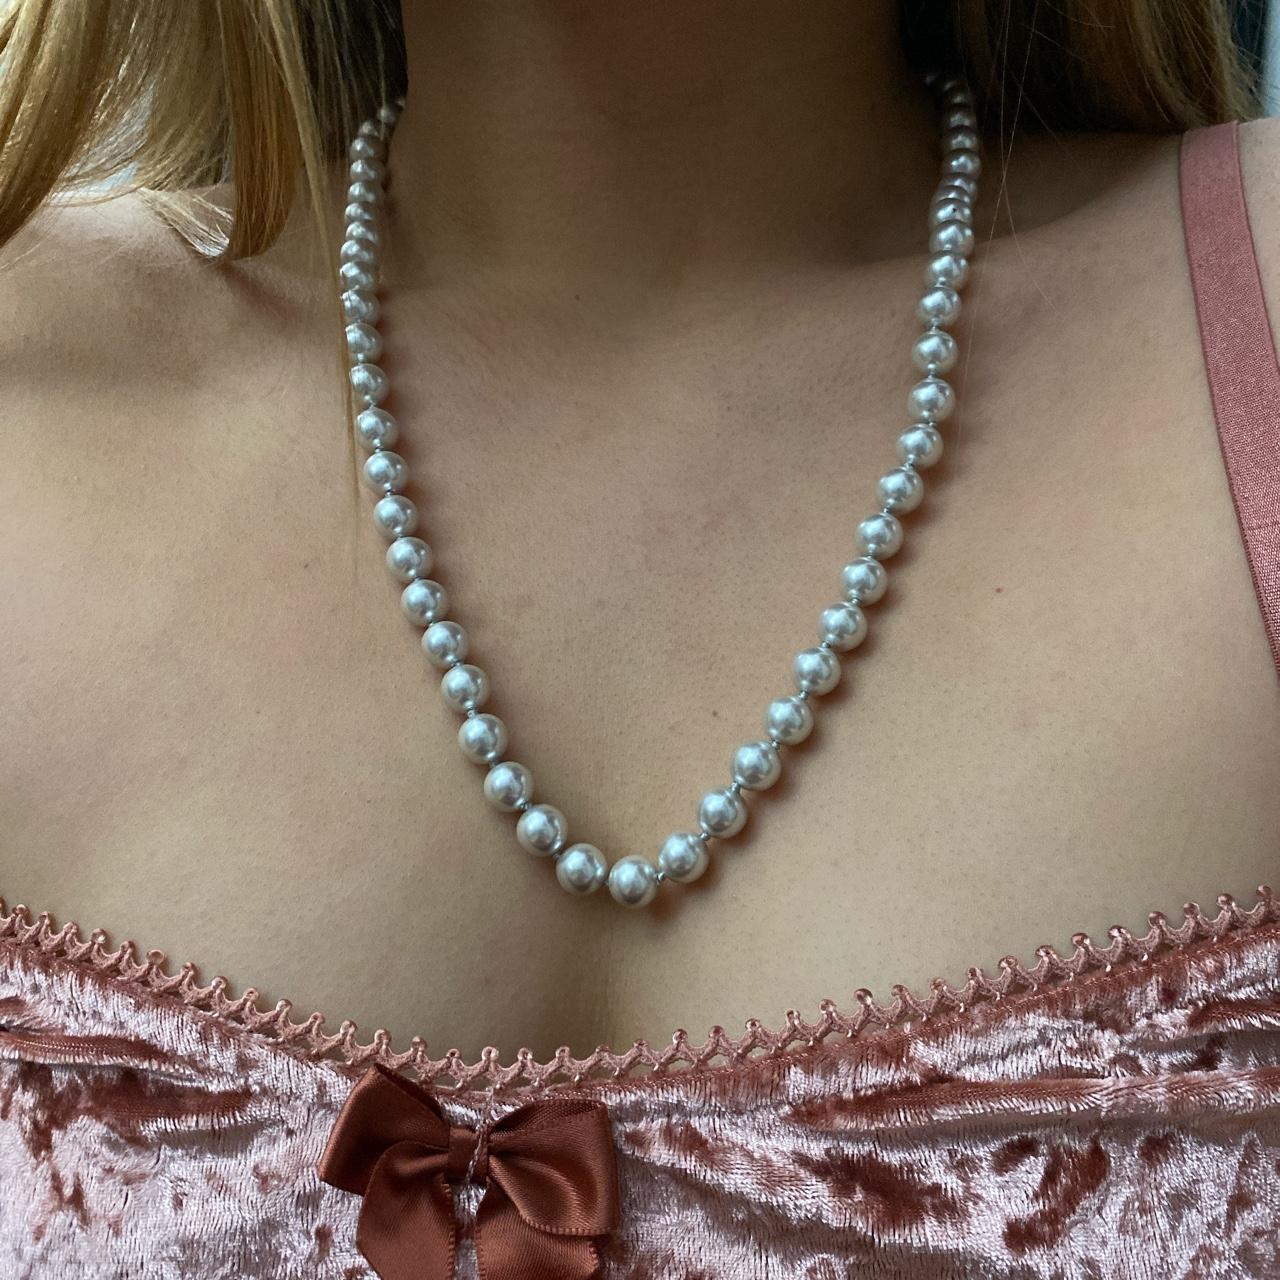 Designer by Monet, necklace, pearls and clear rhinestones in silver tone. |  TheLadyJeweler